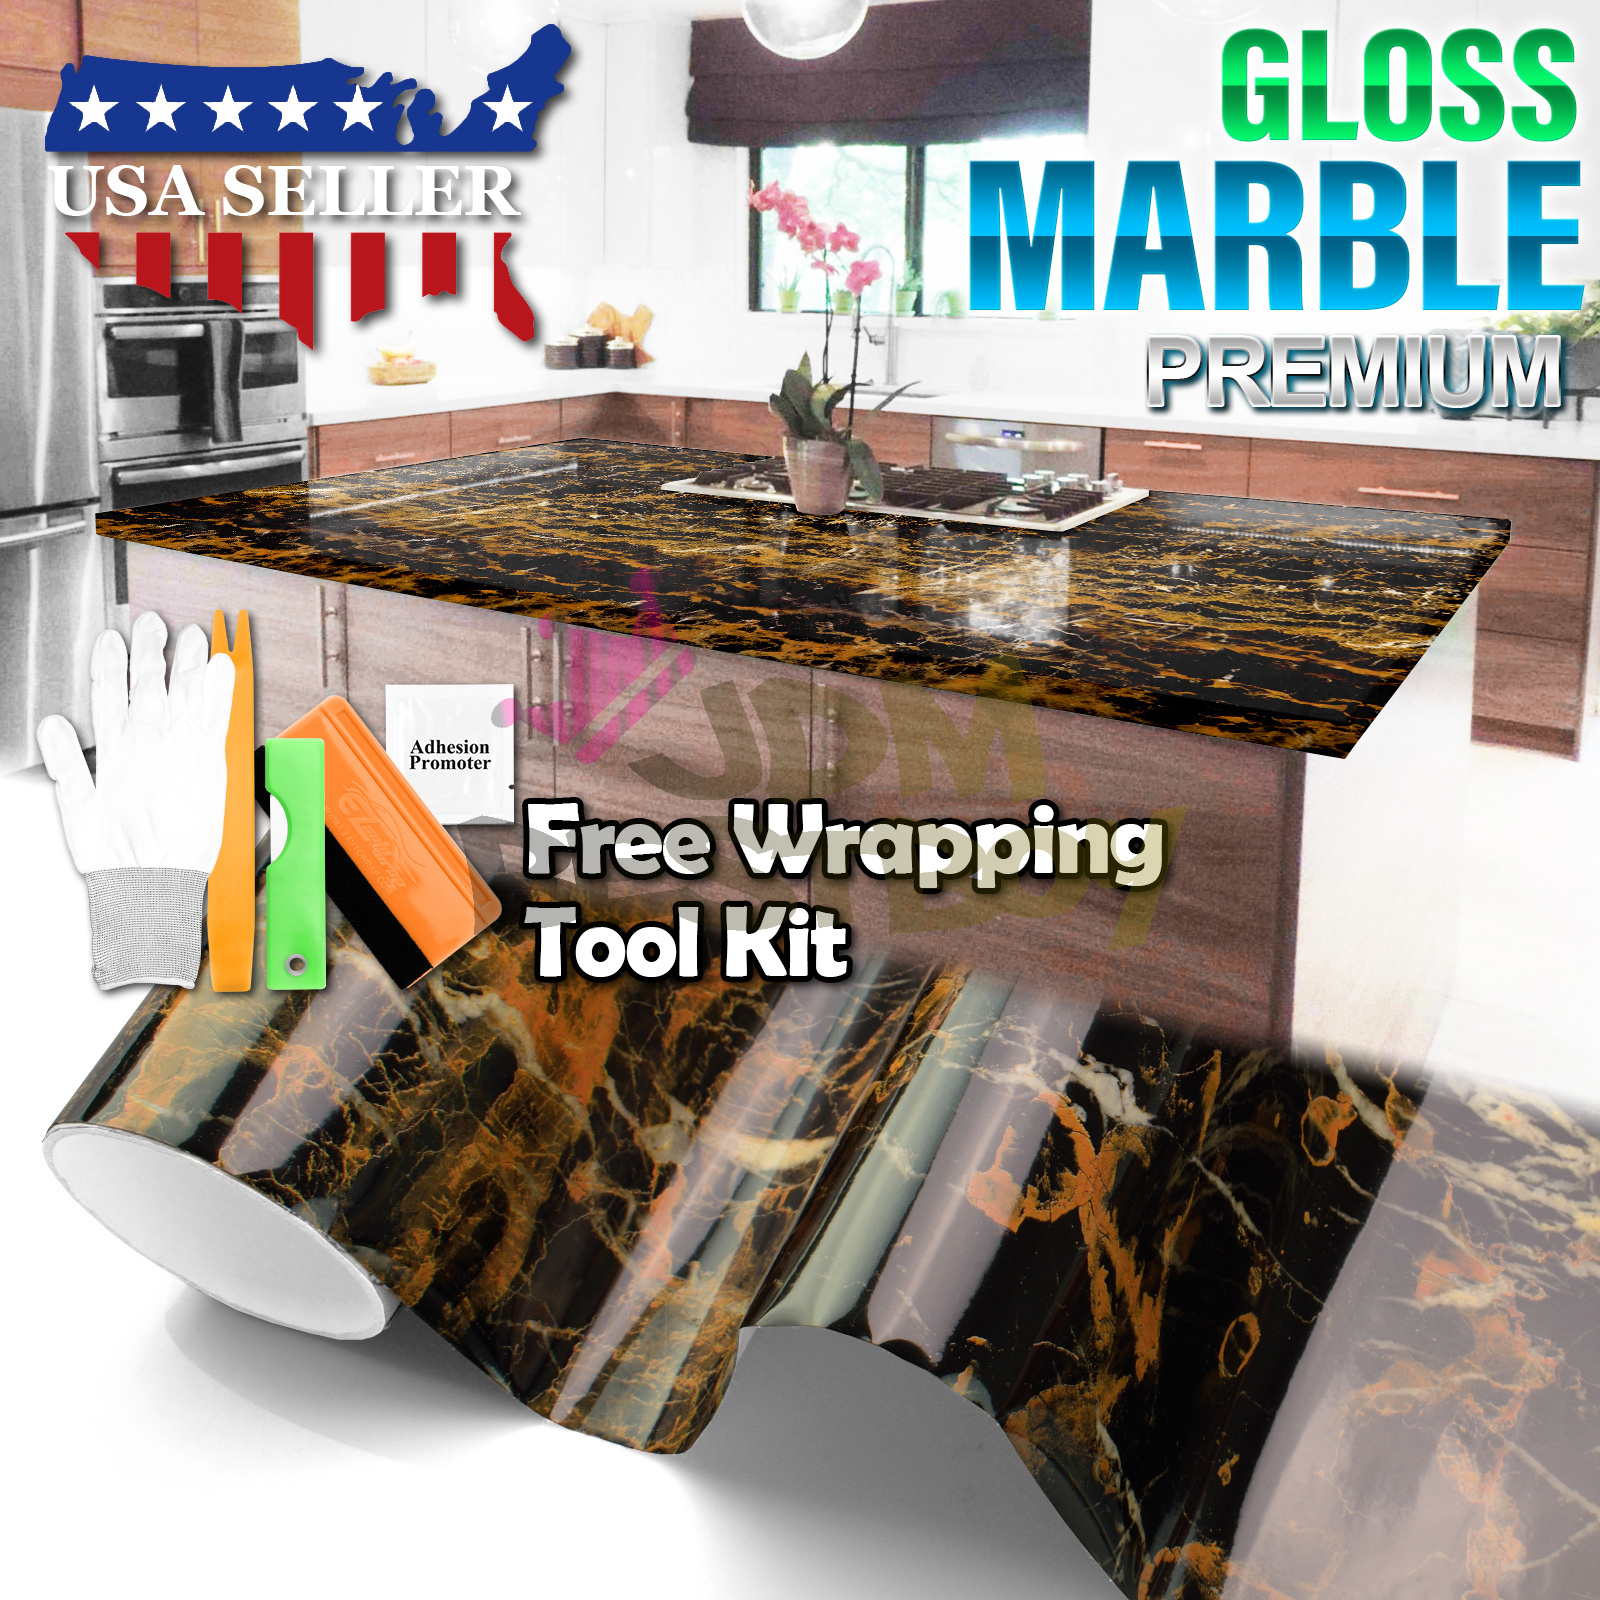 Details About Premium Gloss Marble Granite Look Vinyl Wrap Contact Paper Home Kitchen D14